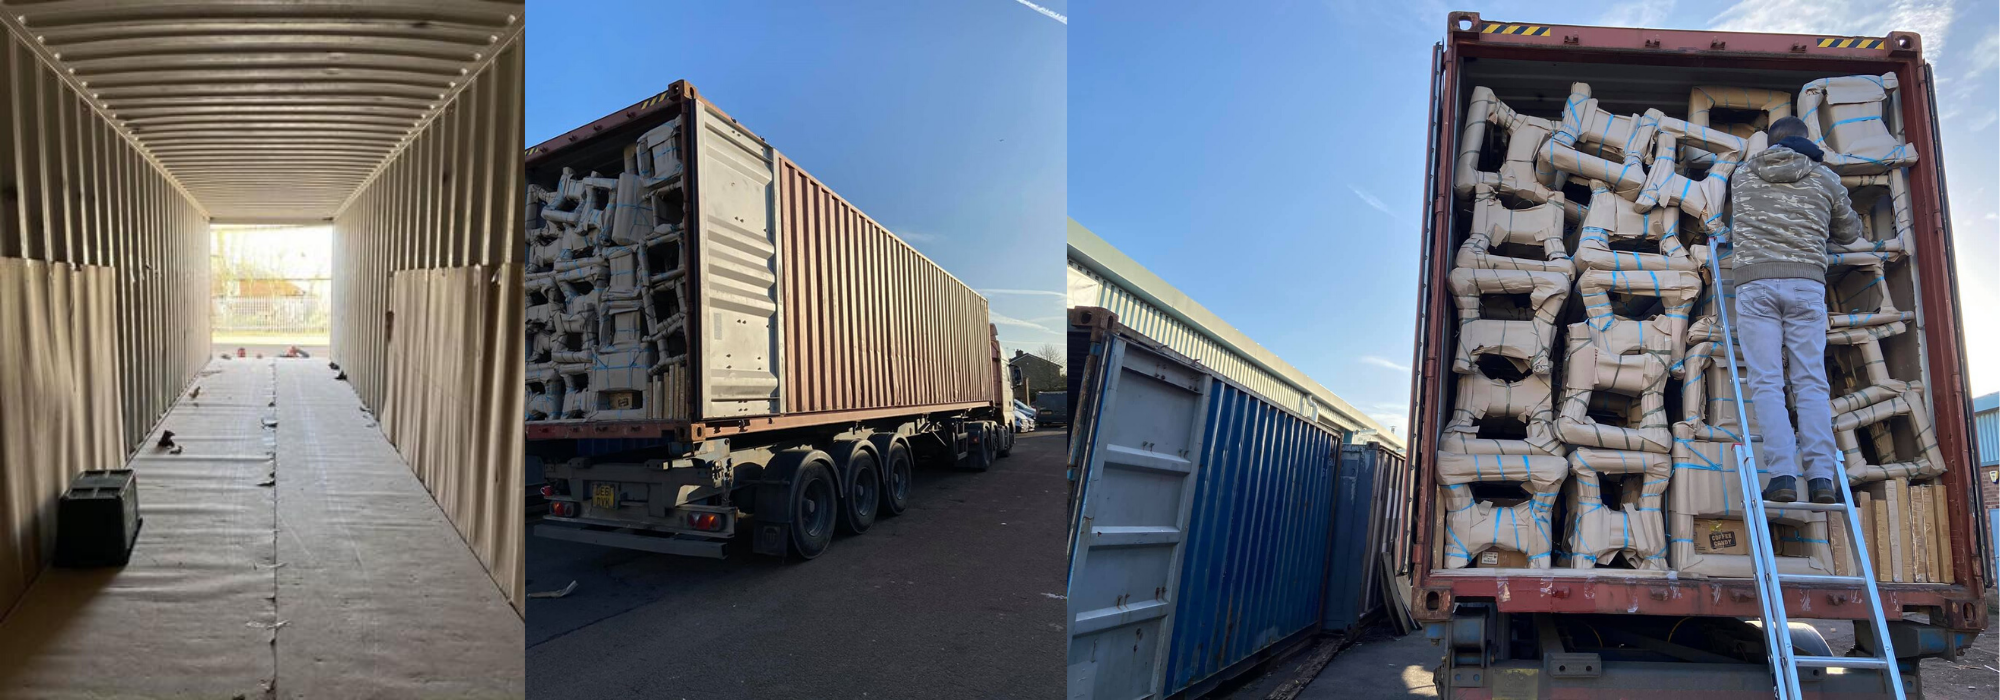 40ft container full